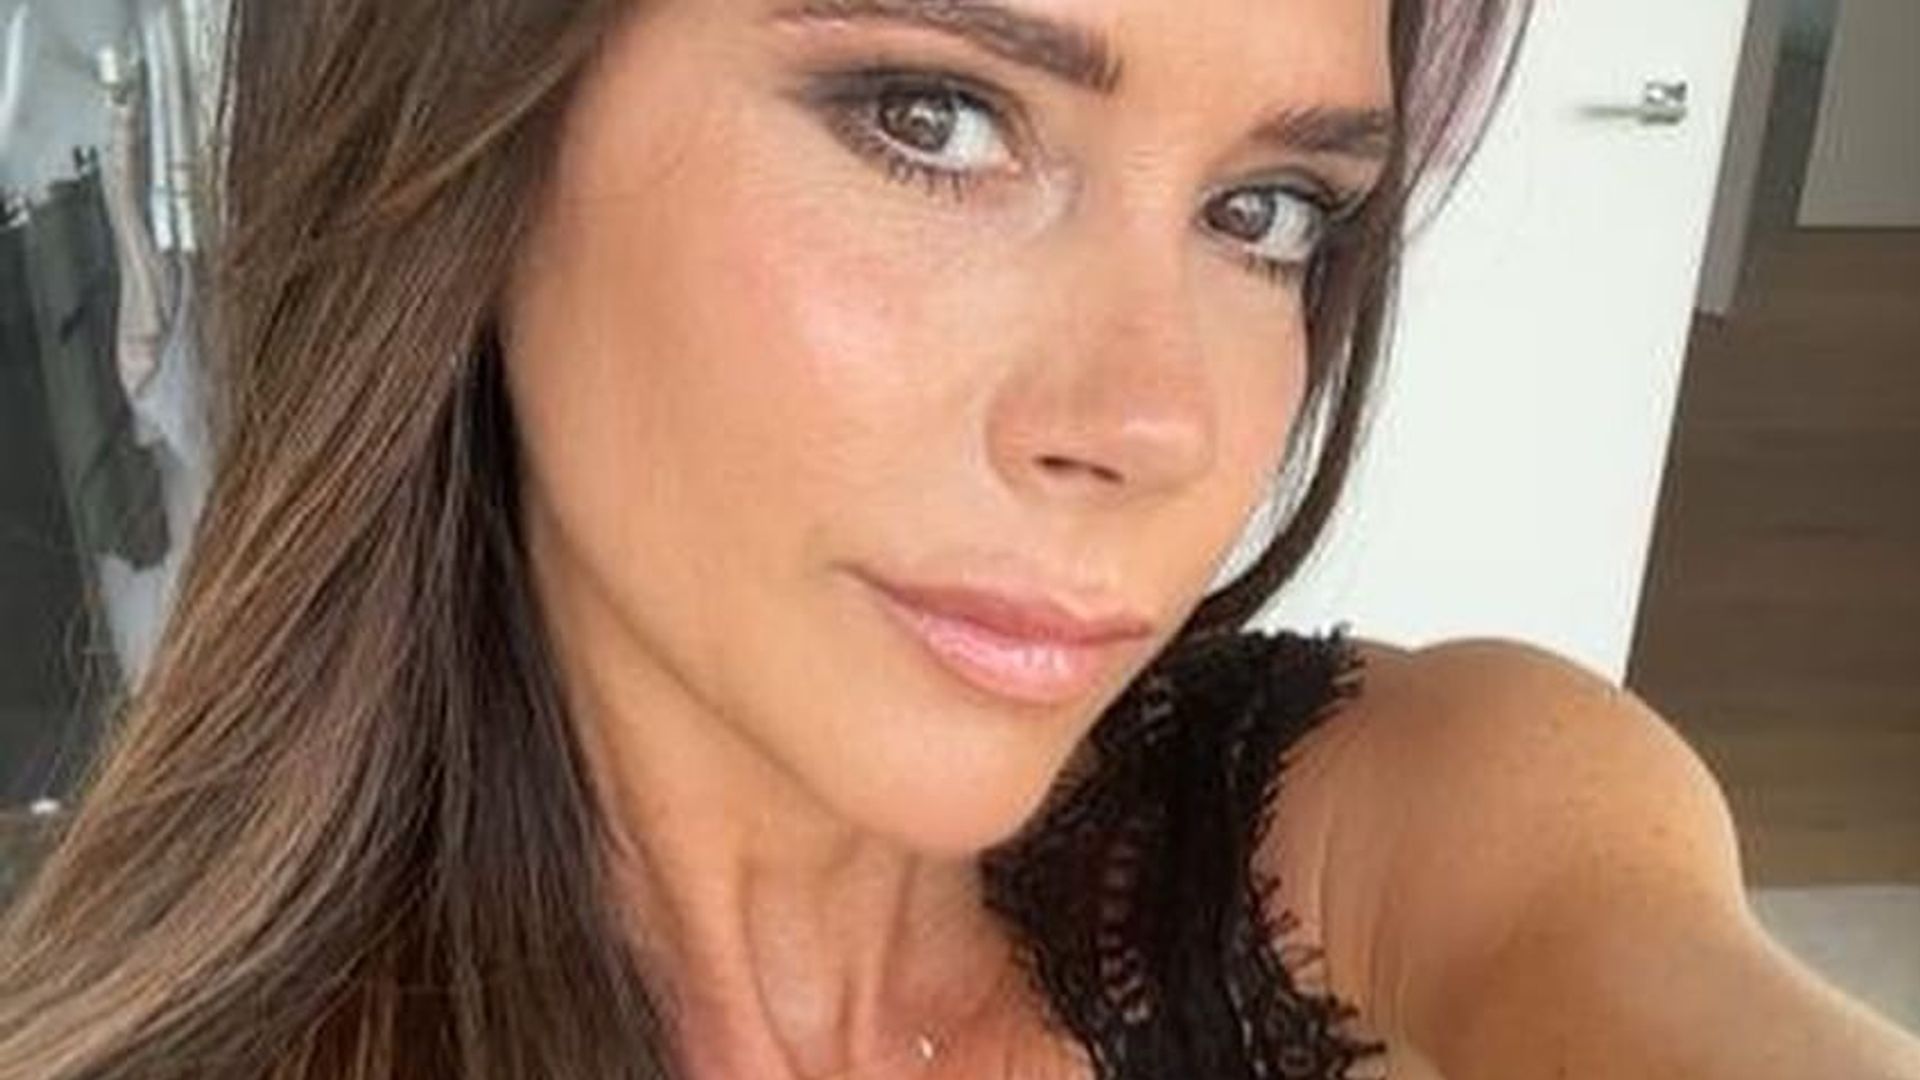 Victoria Beckham wearing plunging lace outfit in London home